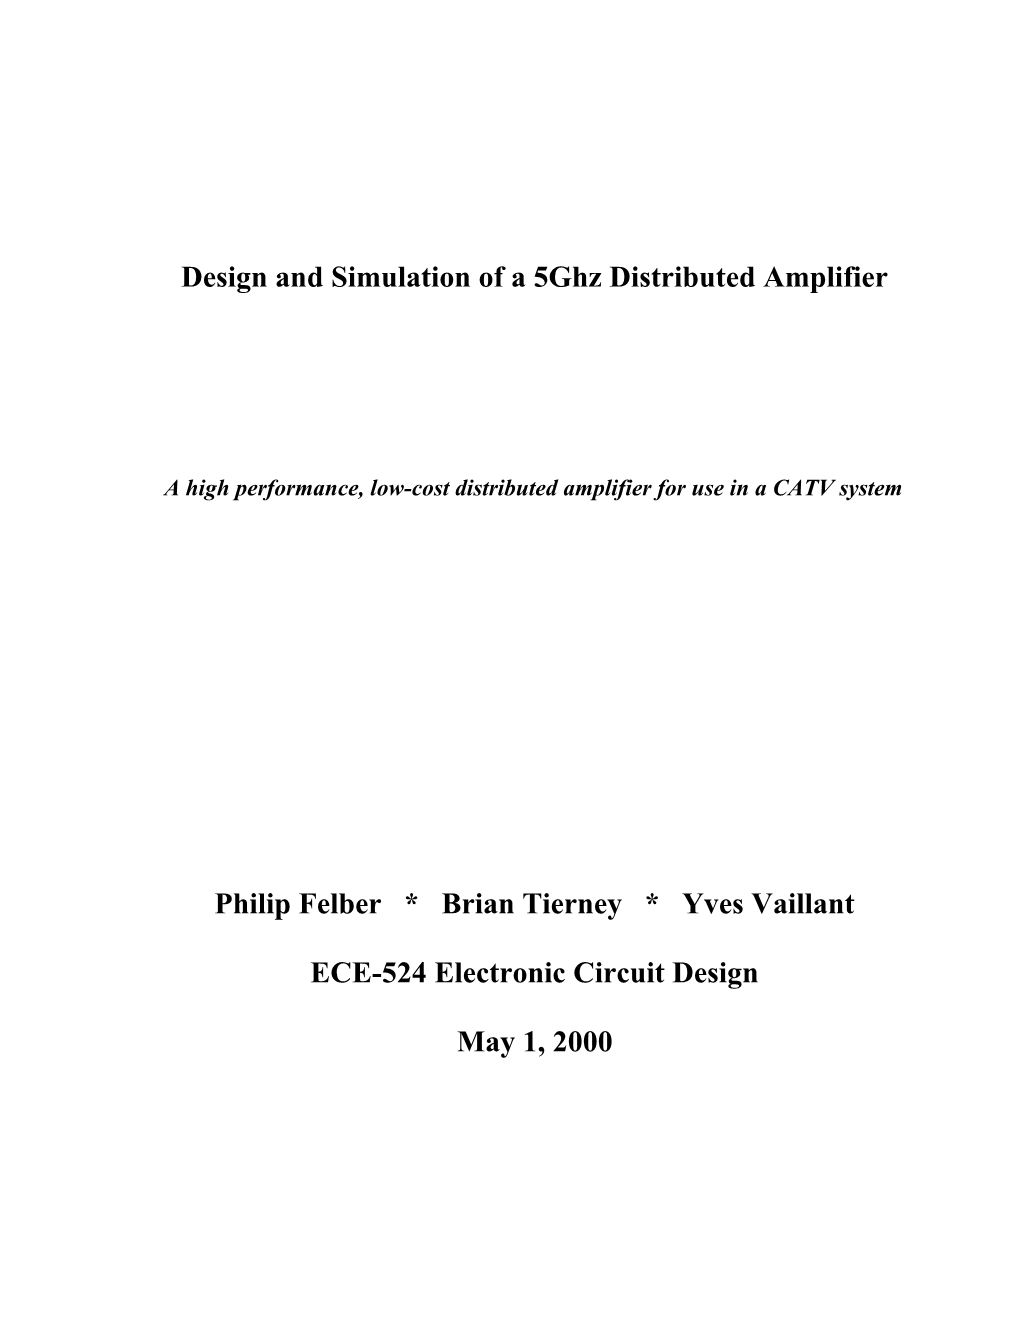 Working Title: a High Performance Low Cost CATV Distribution Amplifier Designed with A